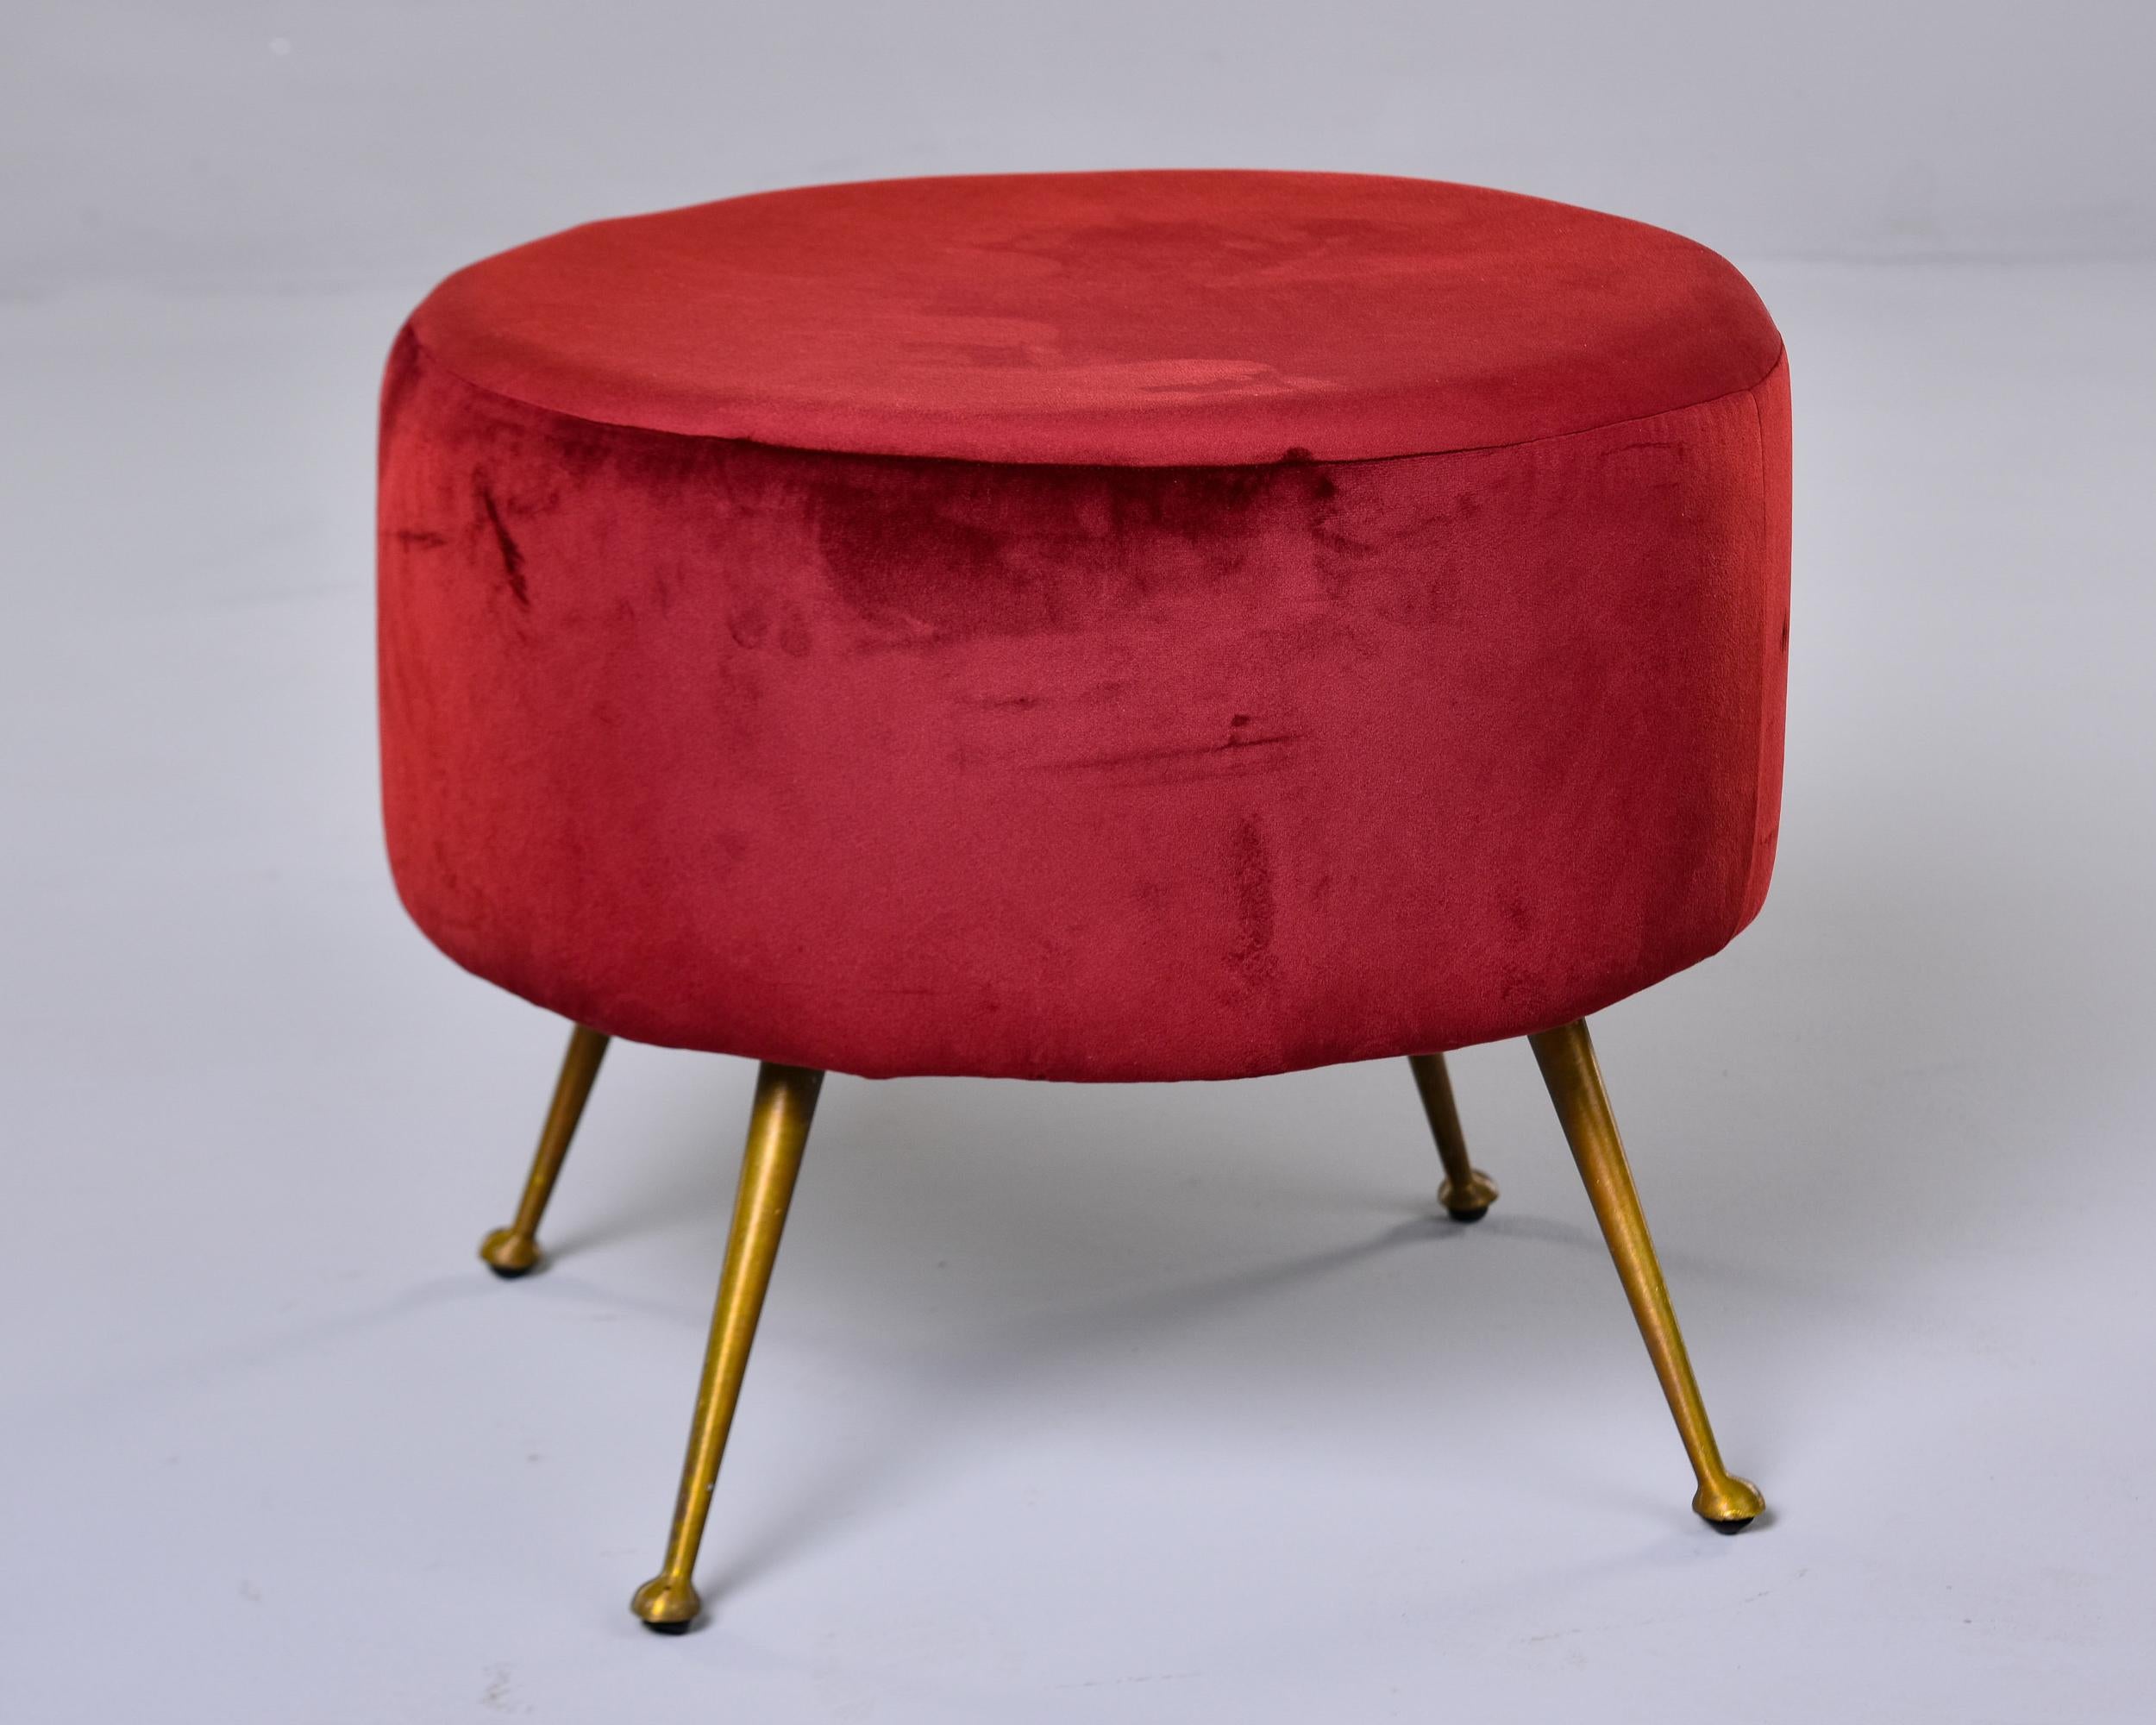 Italian Midcentury Round Stool with Red Upholstery and Brass Legs In Good Condition For Sale In Troy, MI